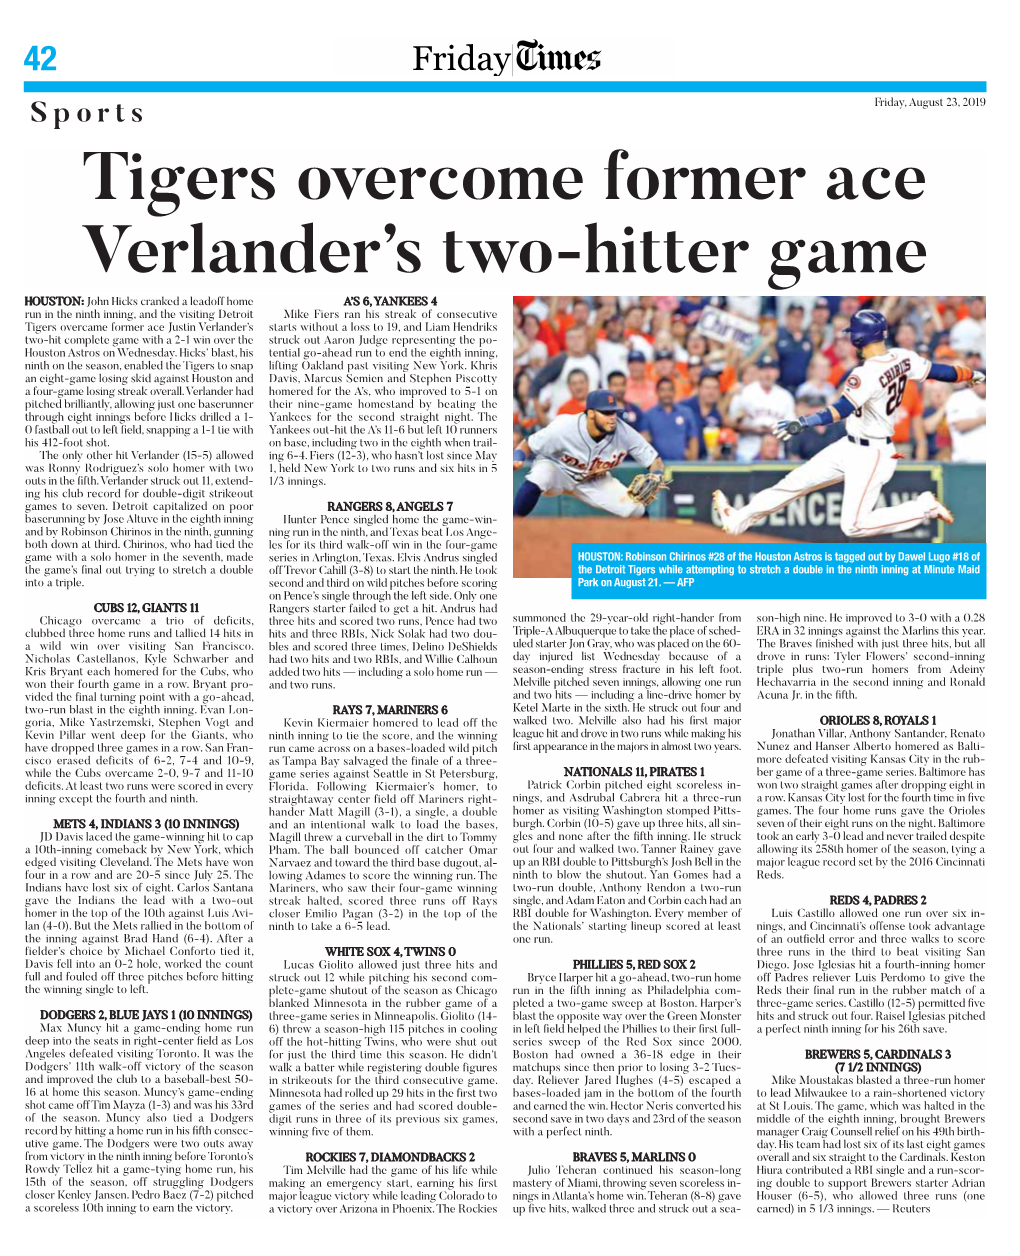 Tigers Overcome Former Ace Verlander's Two-Hitter Game